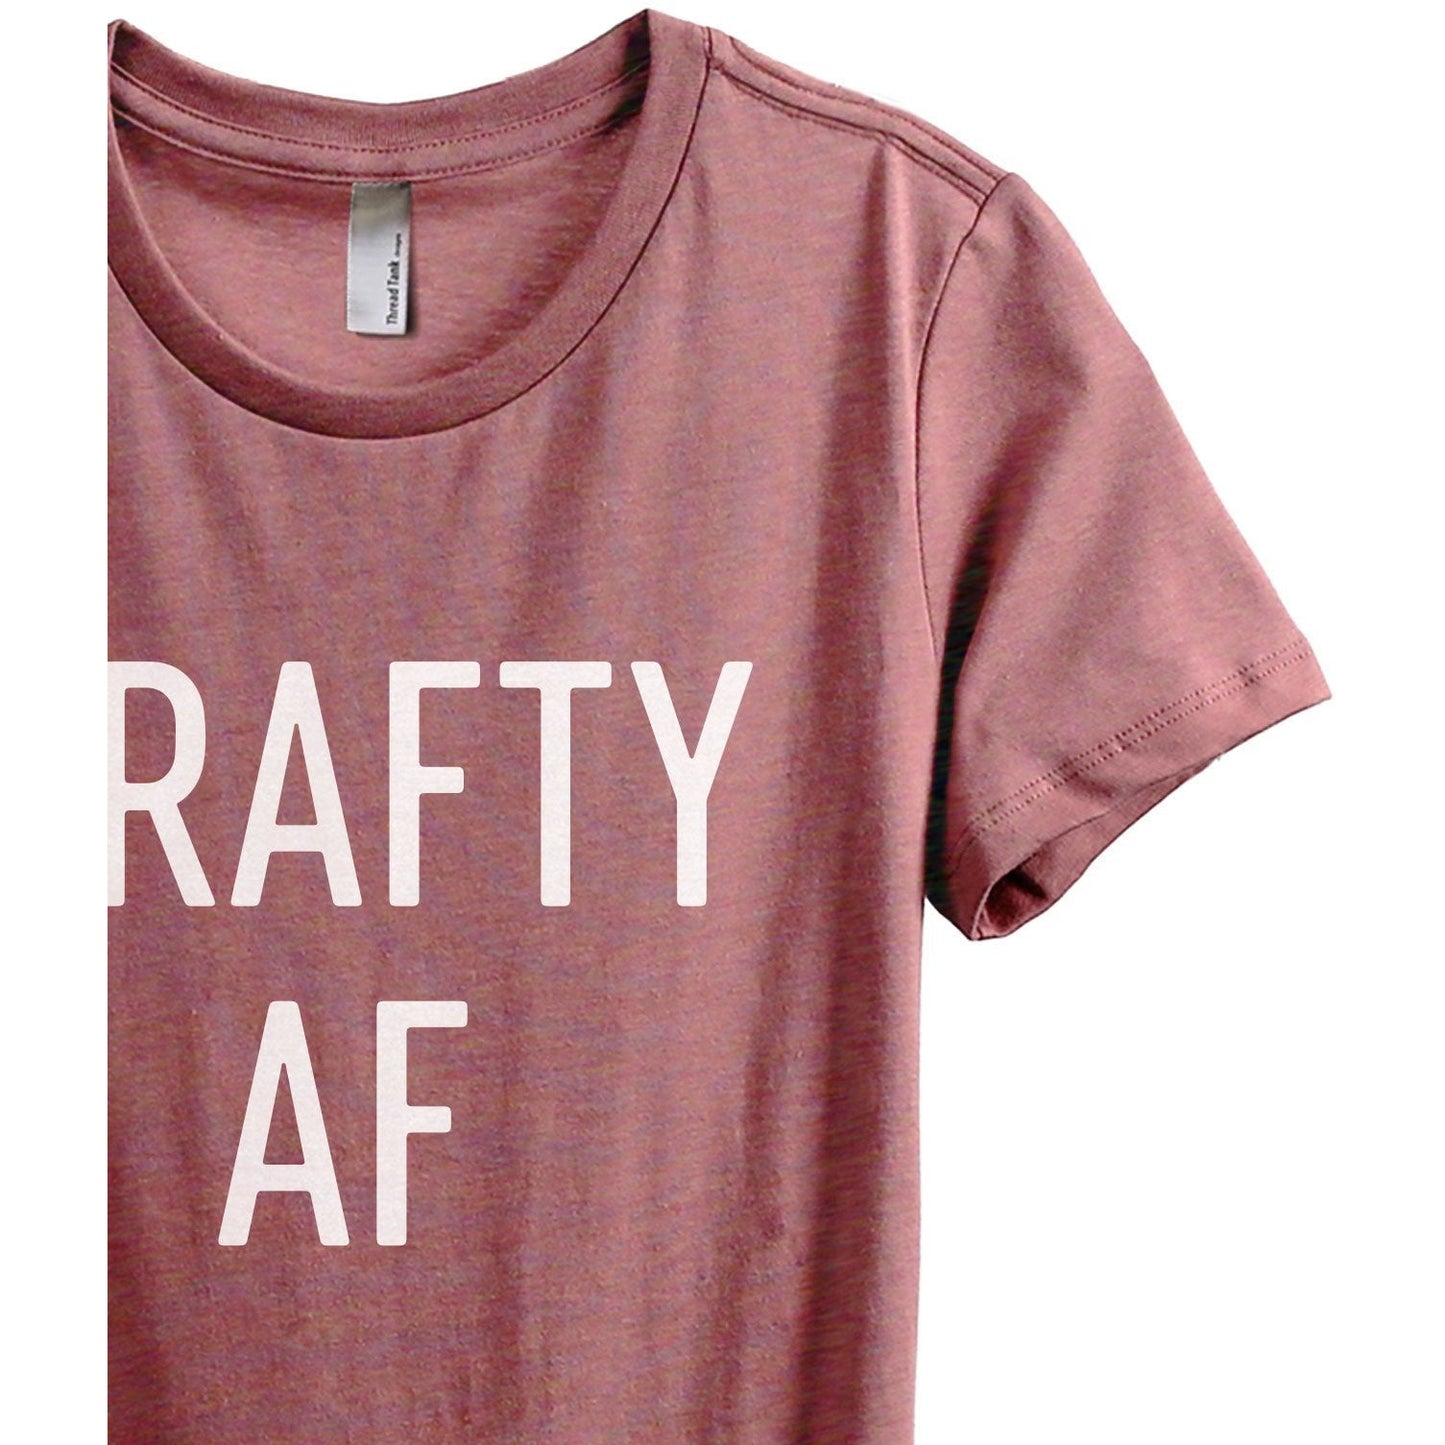 Crafty AF Women's Relaxed Crewneck T-Shirt Top Tee Heather Rouge Zoom Details
